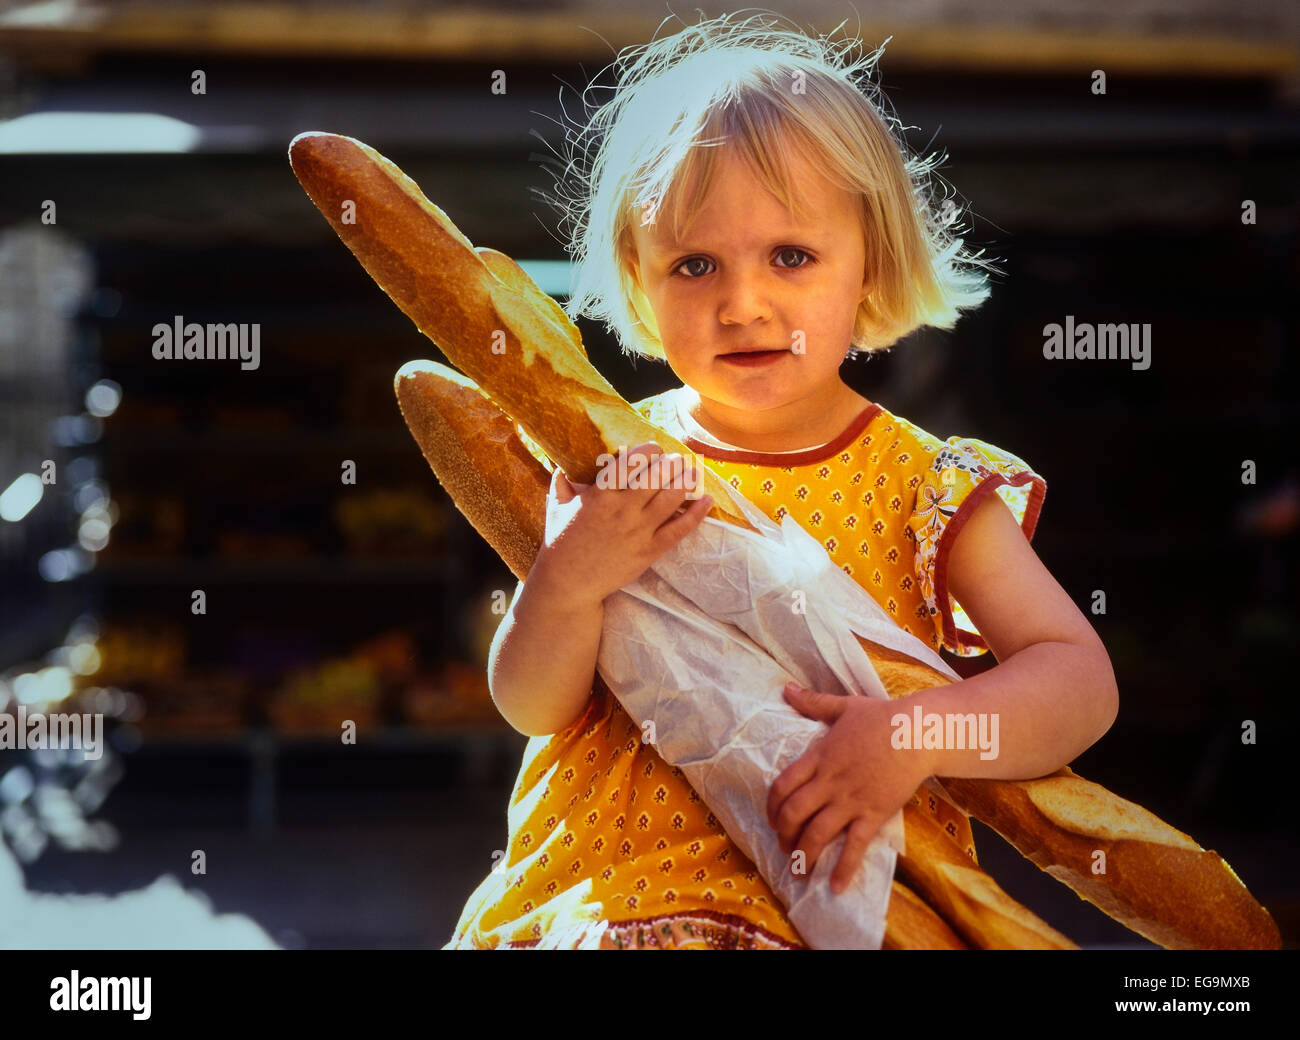 Young girl carrying French baguettes. France. Stock Photo